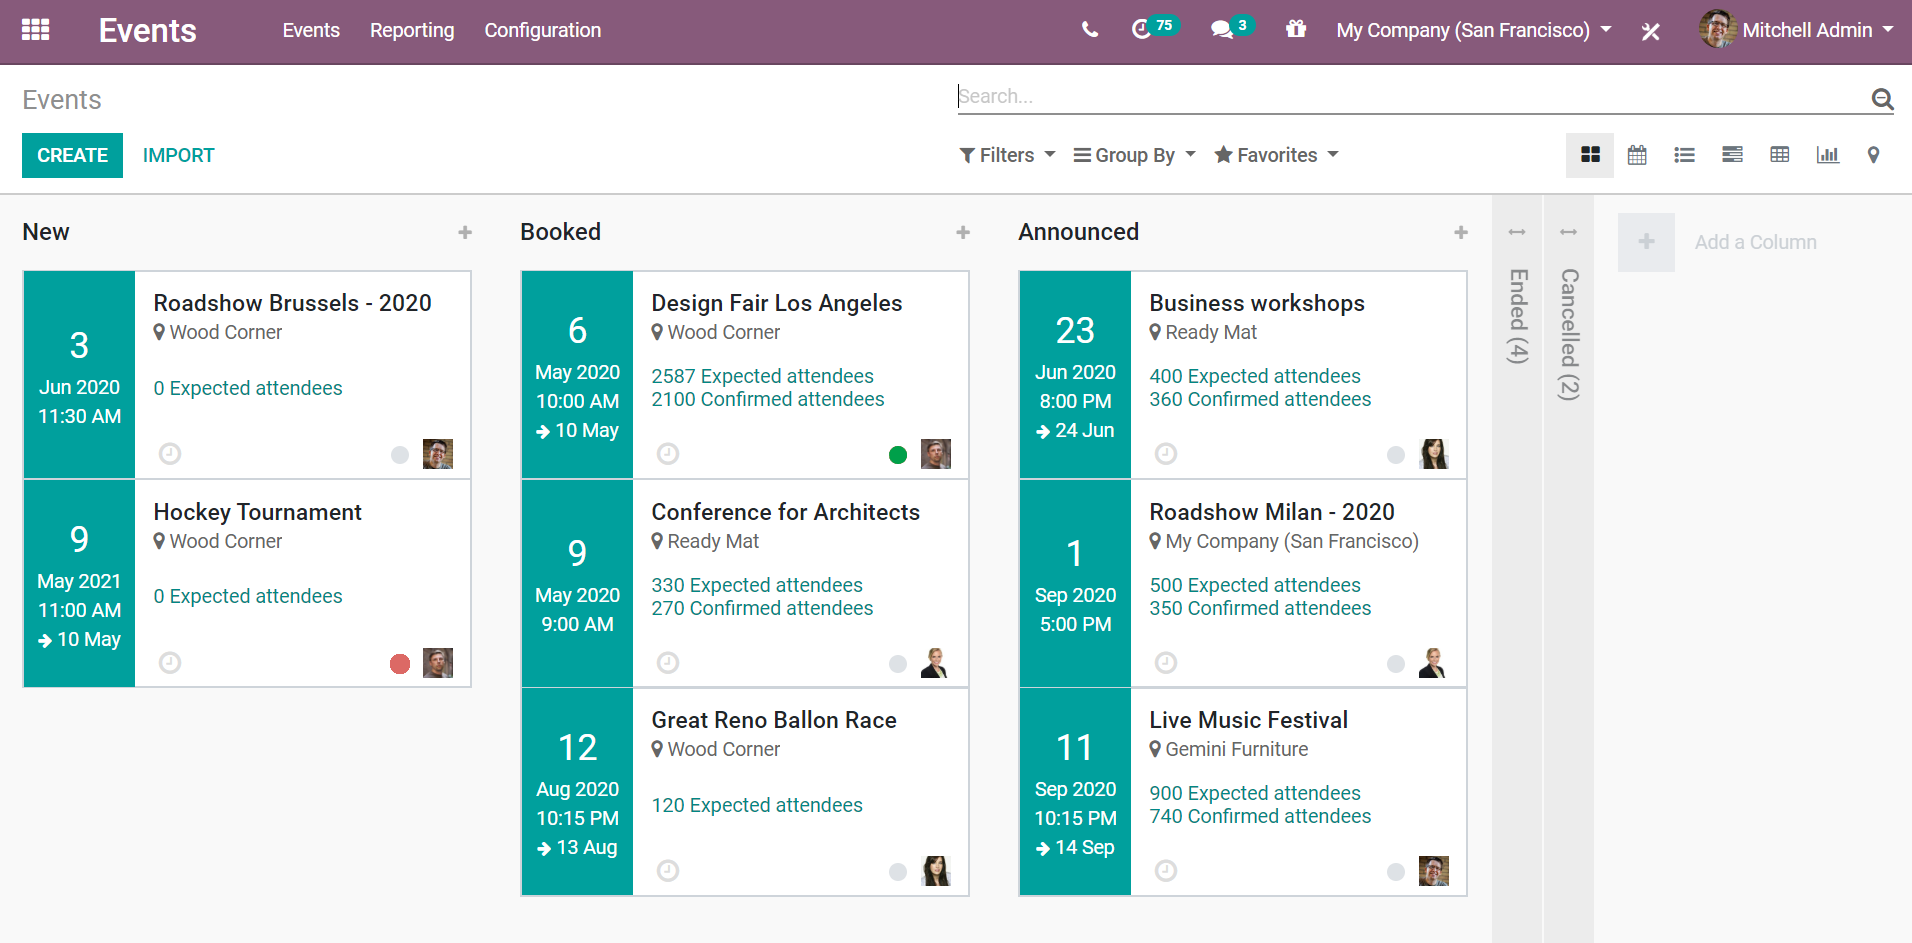 Events dashboard